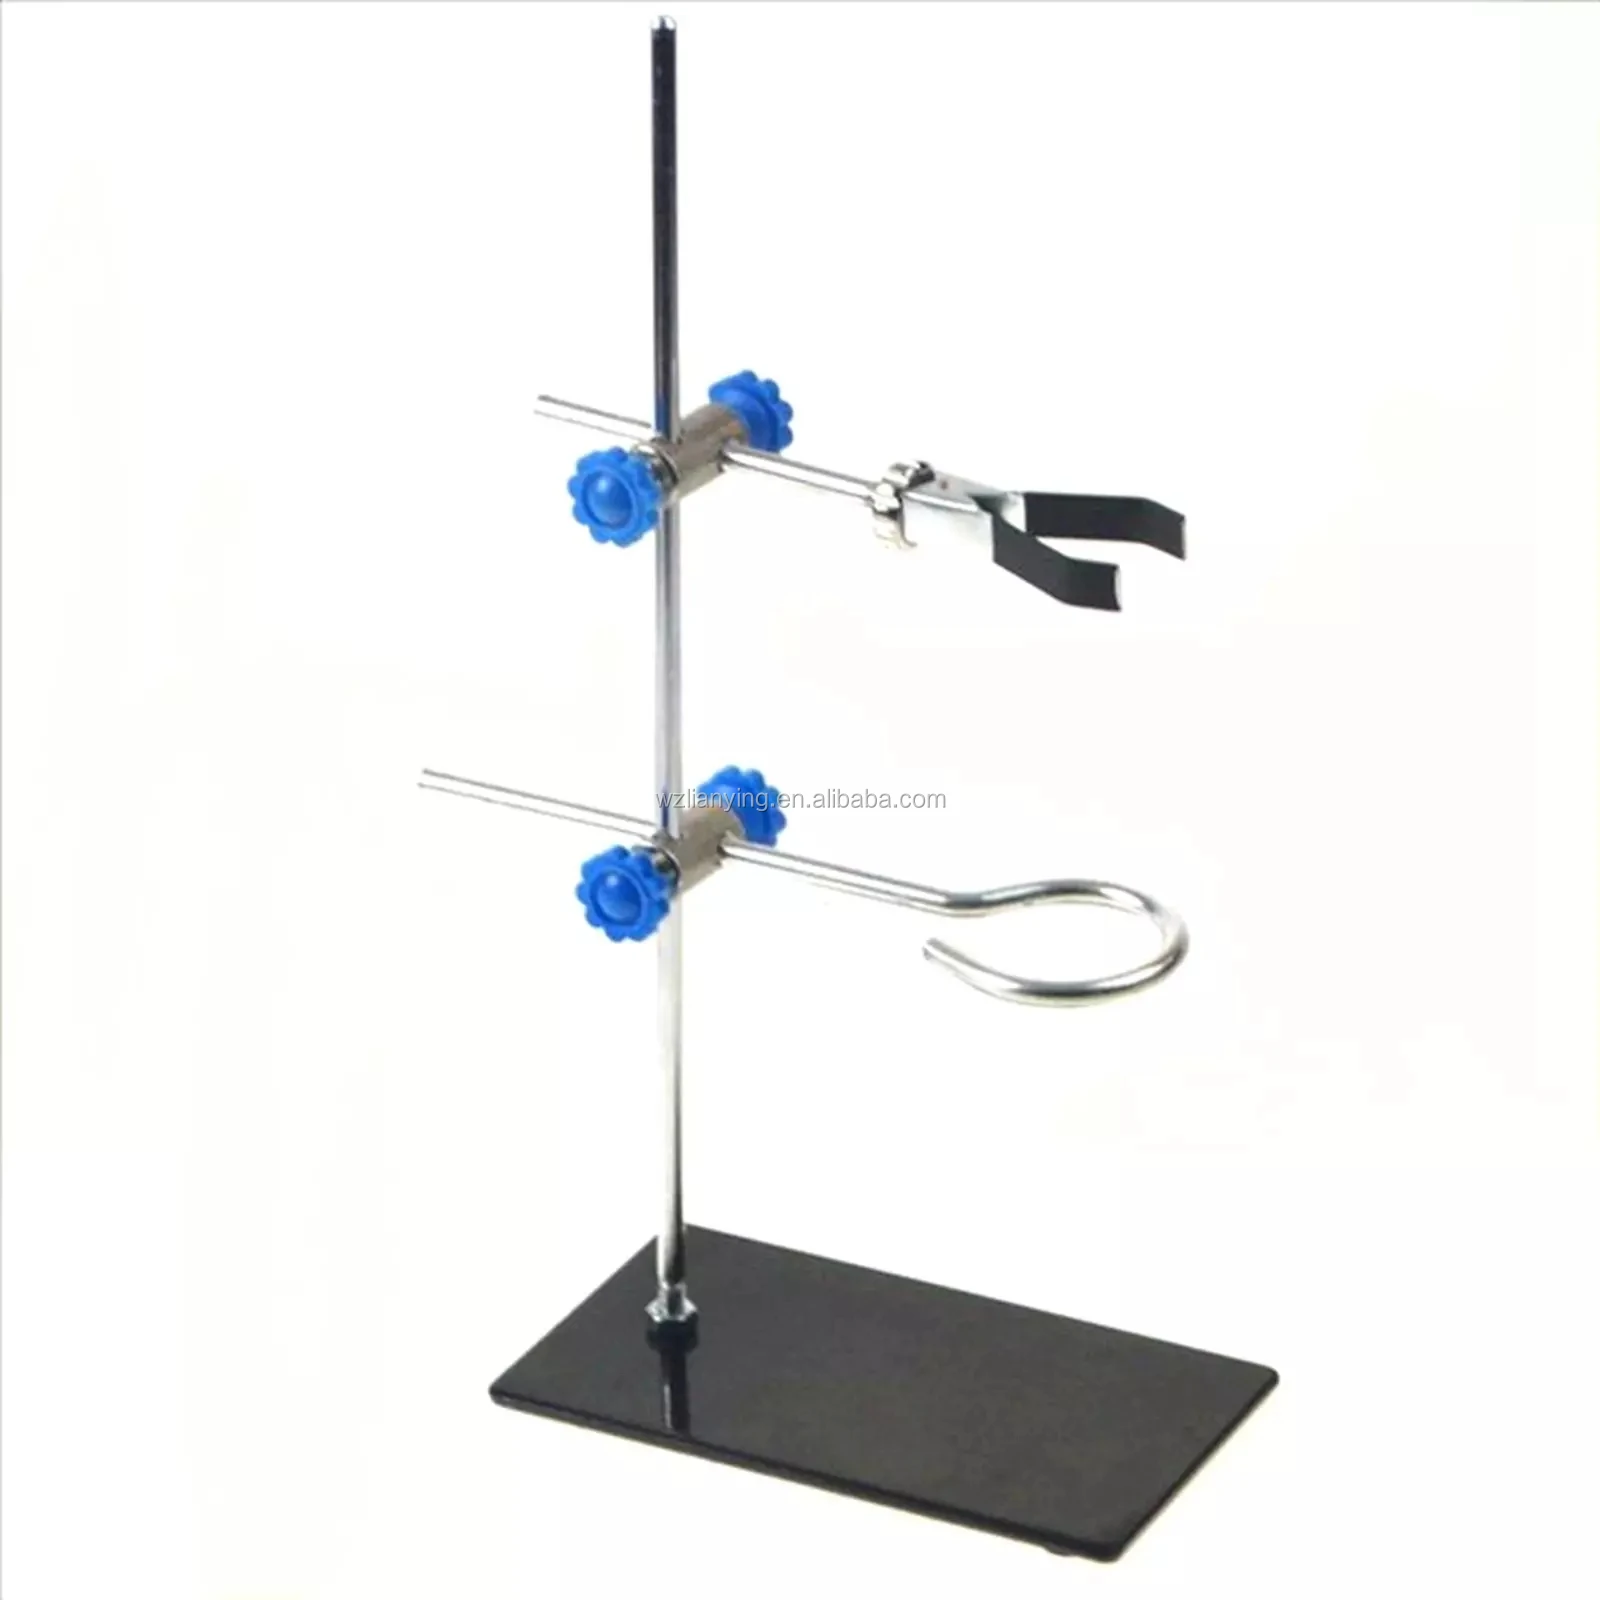 Details about   Top Lab Support Iron Retort Ring Stand Flask Clamp Stand with 3pcs Clamps O 